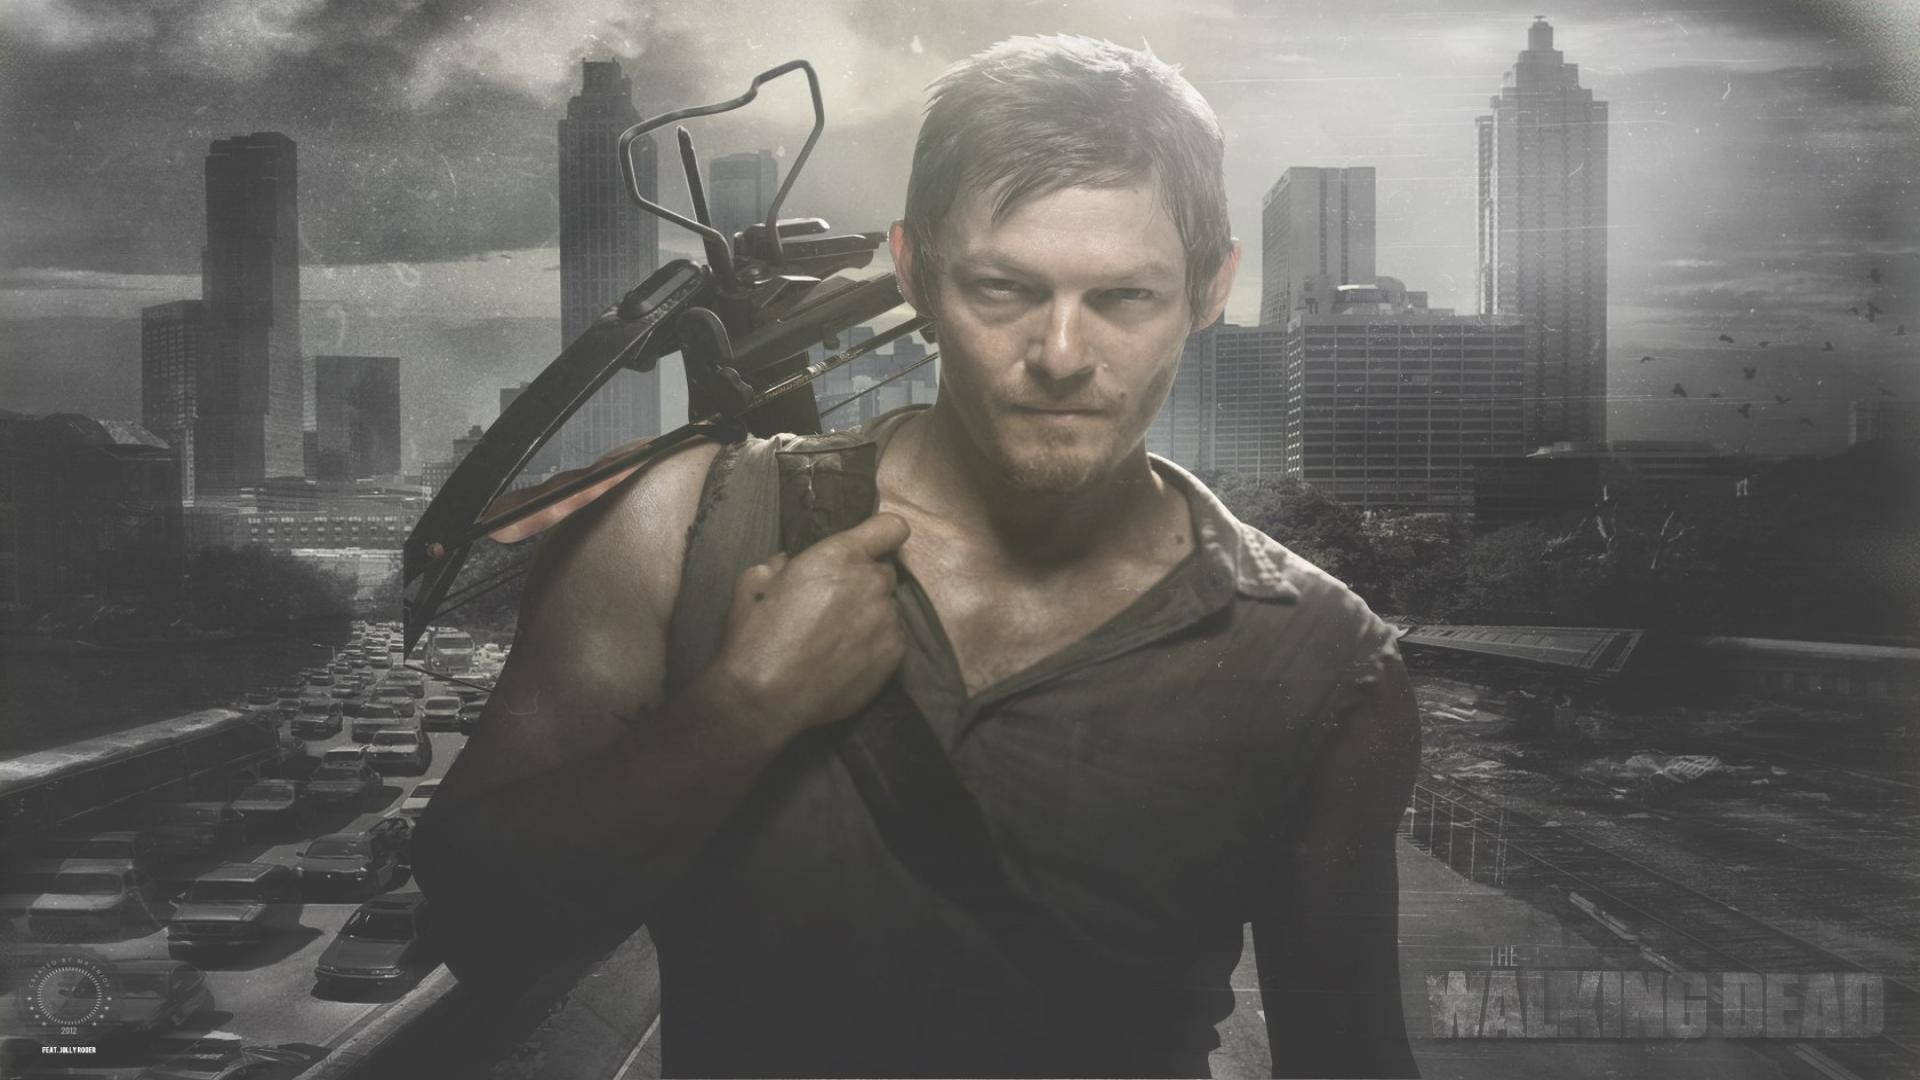 Daryl Dixon - Ready for Action in The Walking Dead Wallpaper